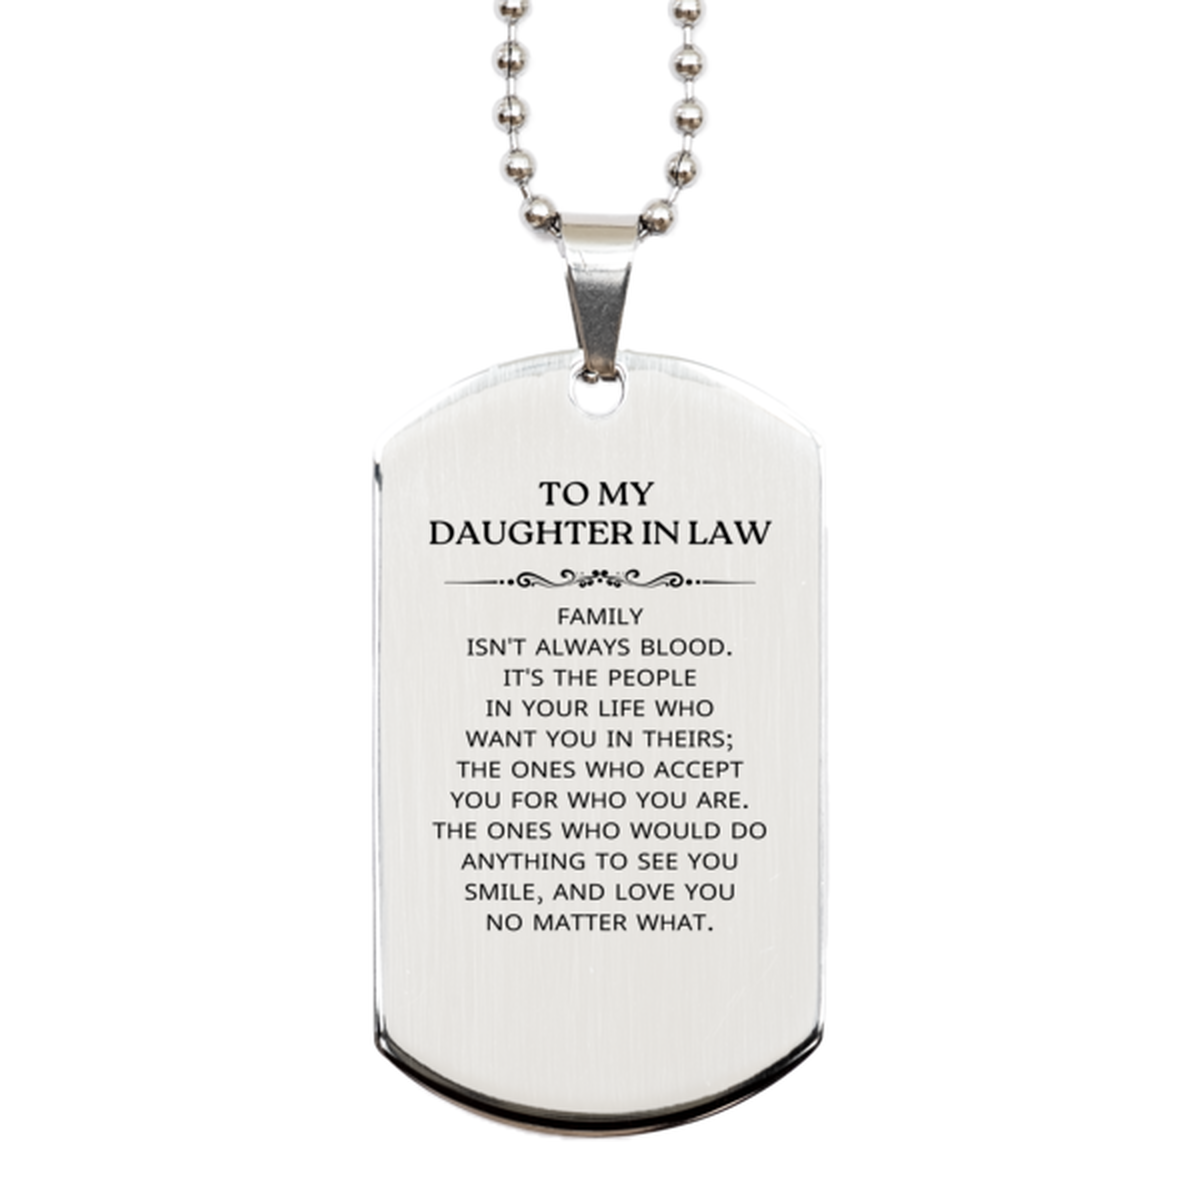 To My Daughter In Law Gifts, Family isn't always blood, Daughter In Law Silver Dog Tag, Birthday Christmas Unique Present For Daughter In Law